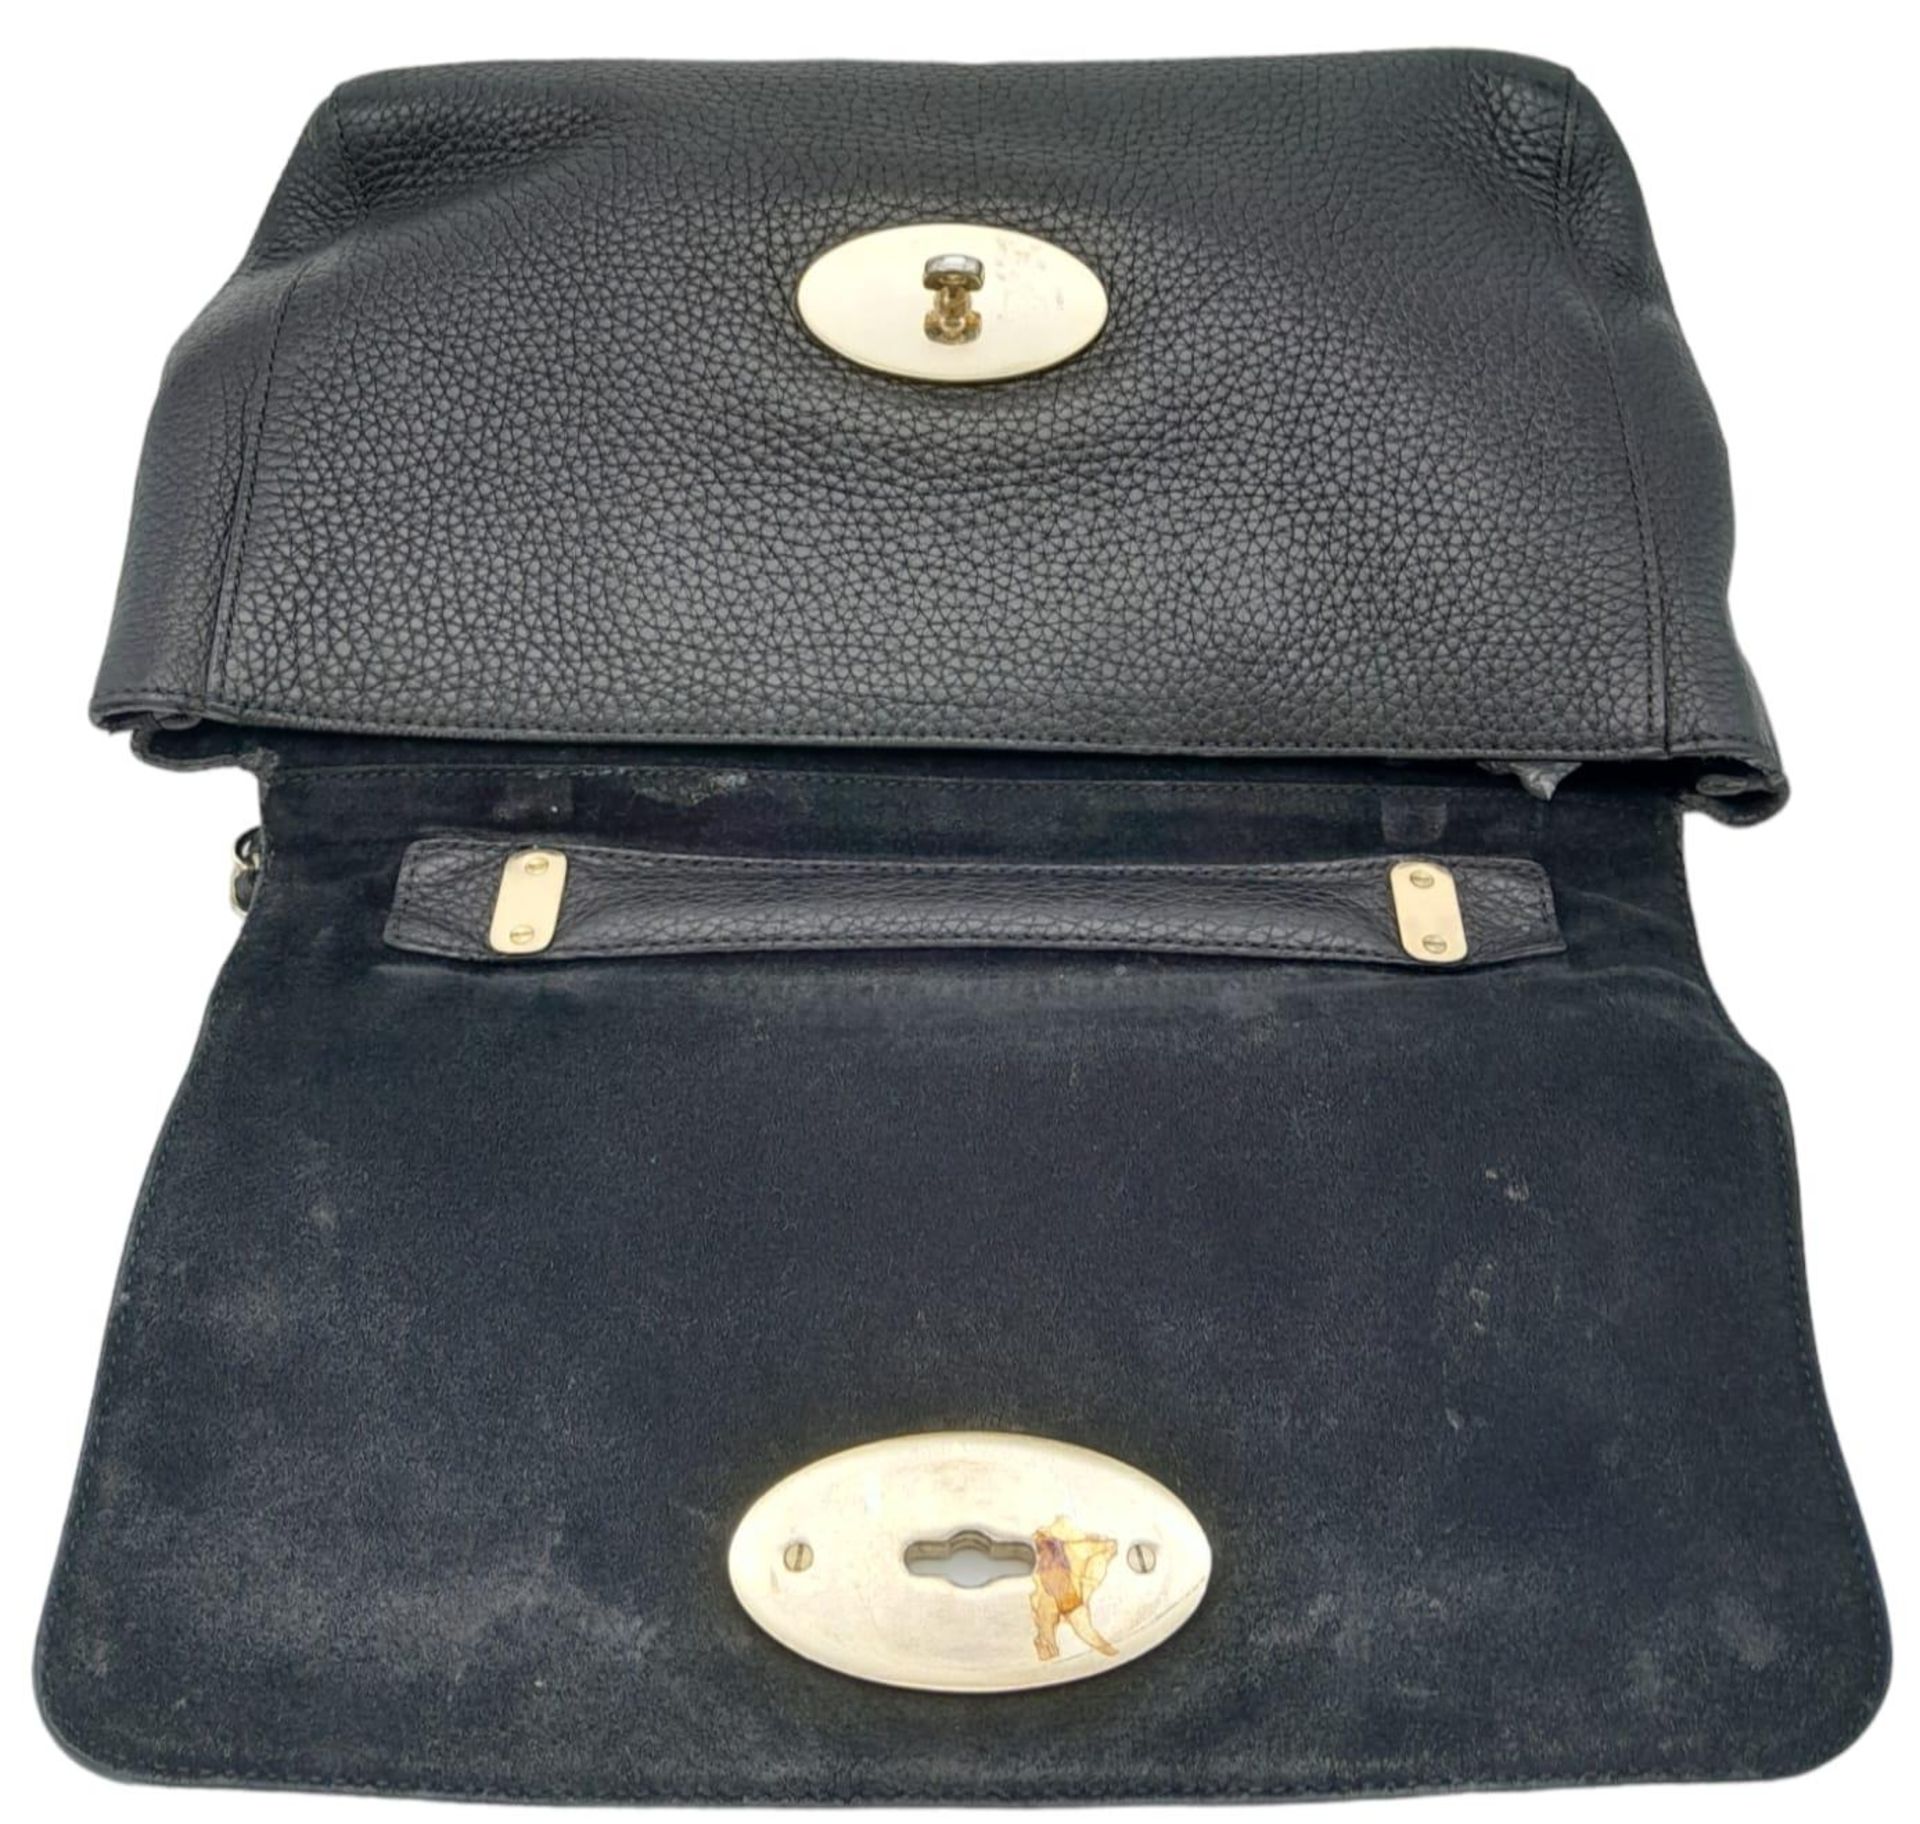 A Black Mulberry Lily Bag. With a Classic Grain Leather, Flap Over Design, Signature Postman Style - Image 5 of 10